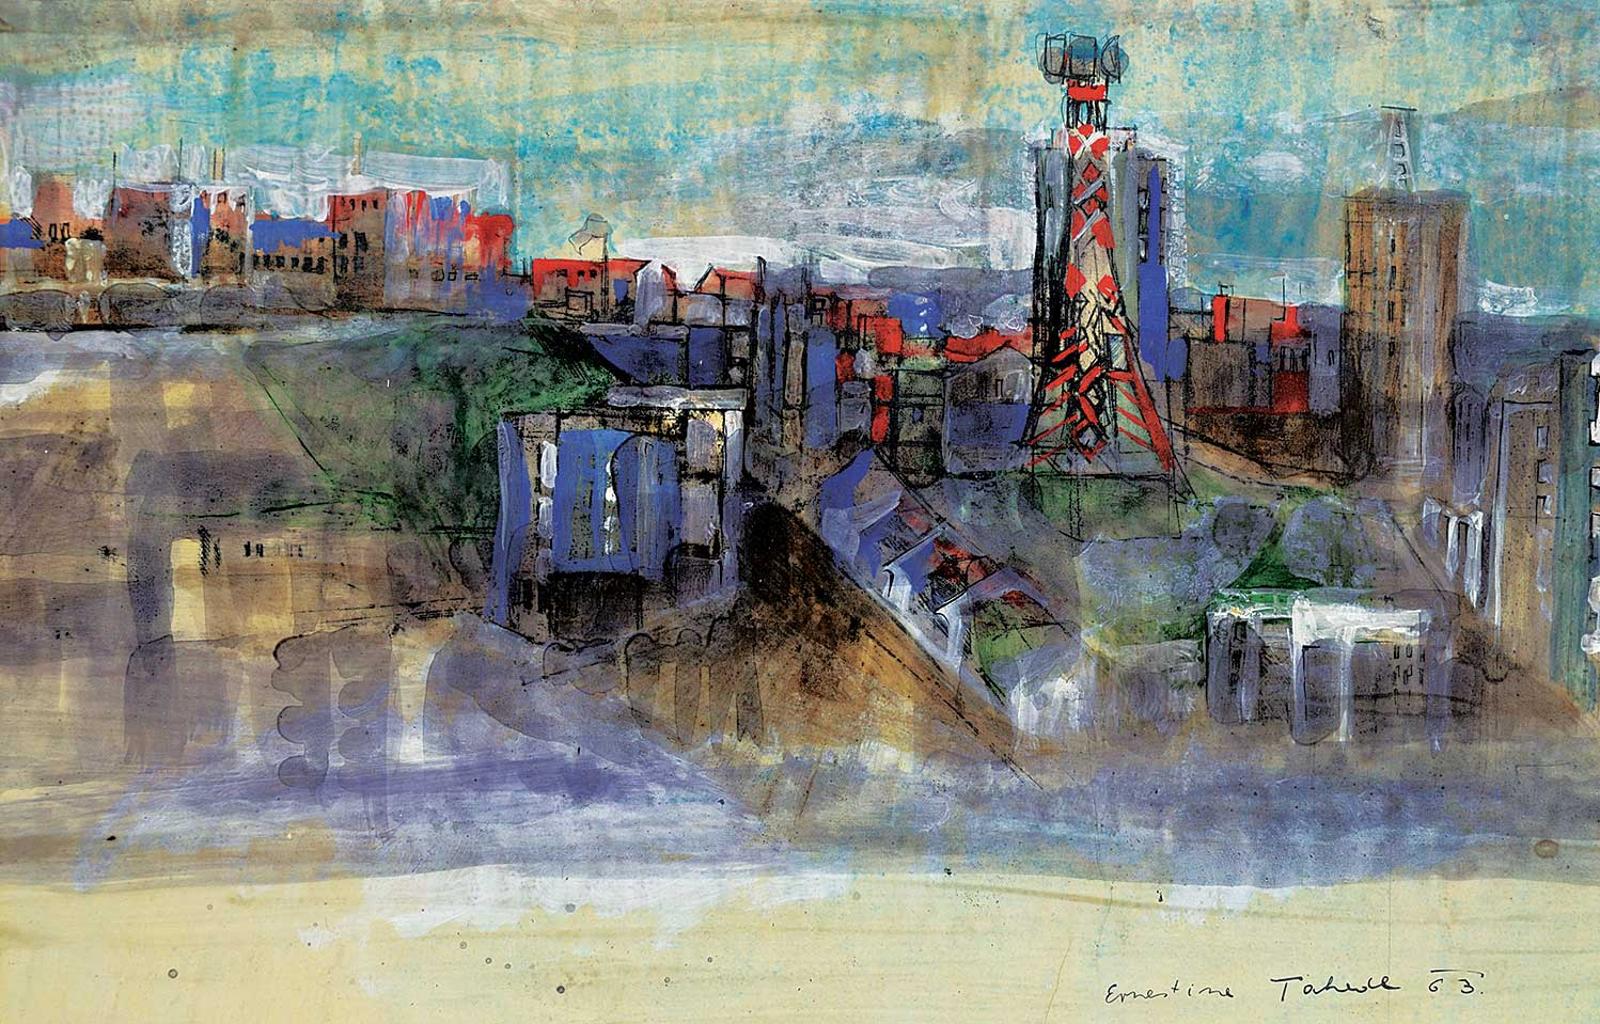 Ernestine Tahedl (1940) - Untitled - View of South Edmonton from Across the Valley